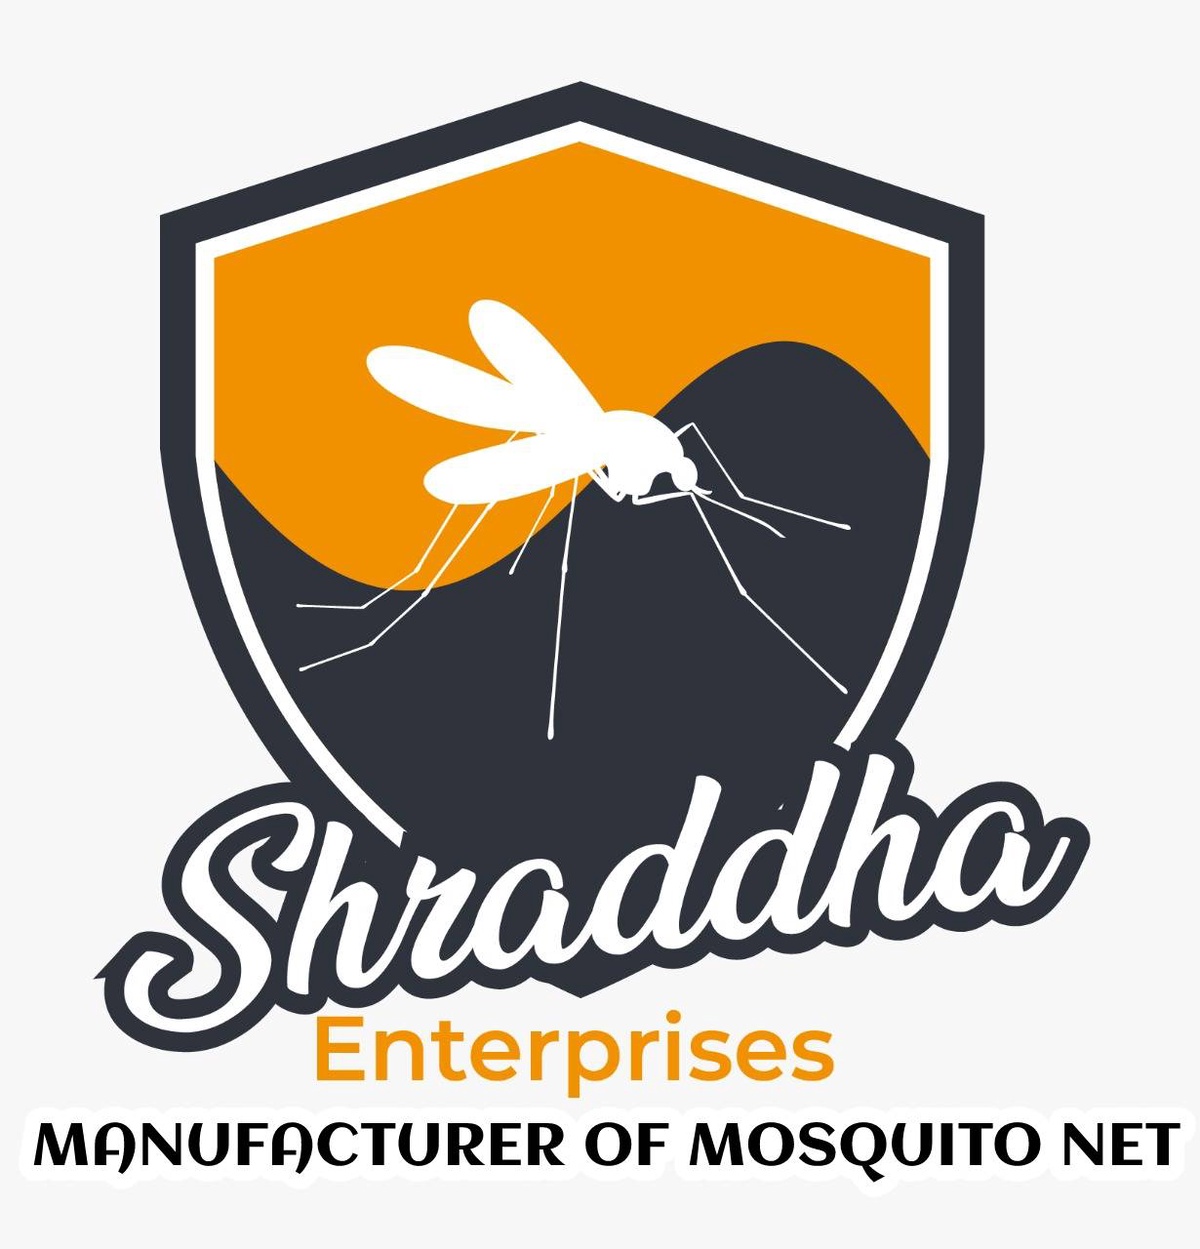 Pleated Mosquito Nets: A Stylish and Effective Solution for Mumbai's Mosquito Problem